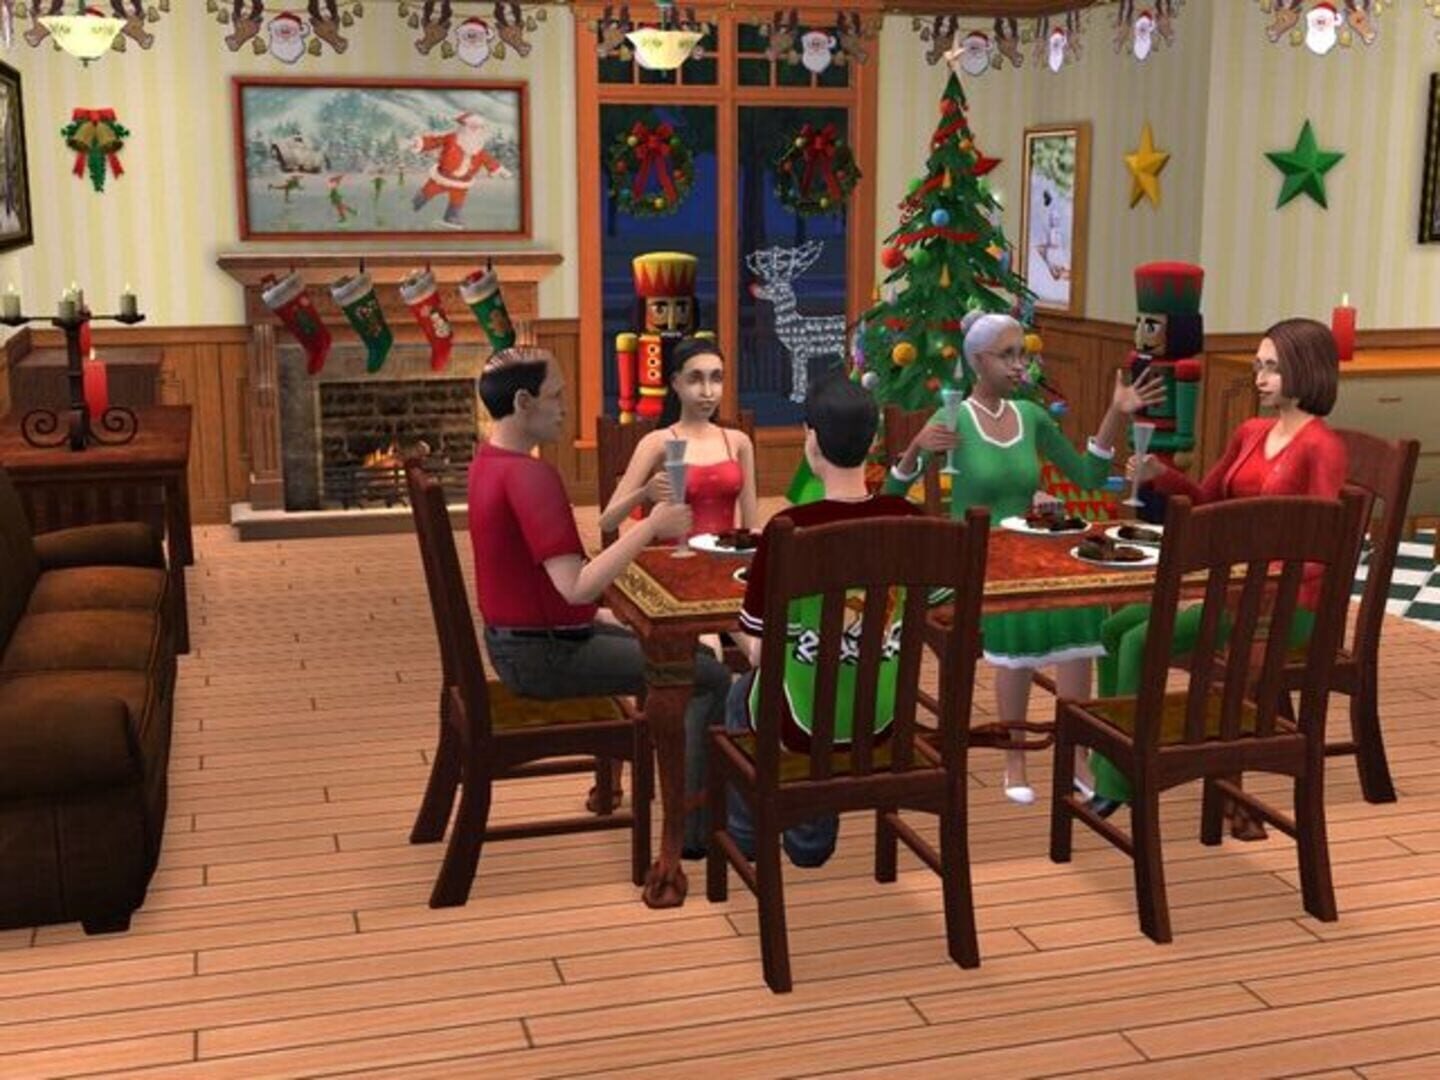 Game sims 2. The SIMS 2. Christmas SIMS 2. Симс 2 новый год. SIMS 2 Christmas Party Pack.